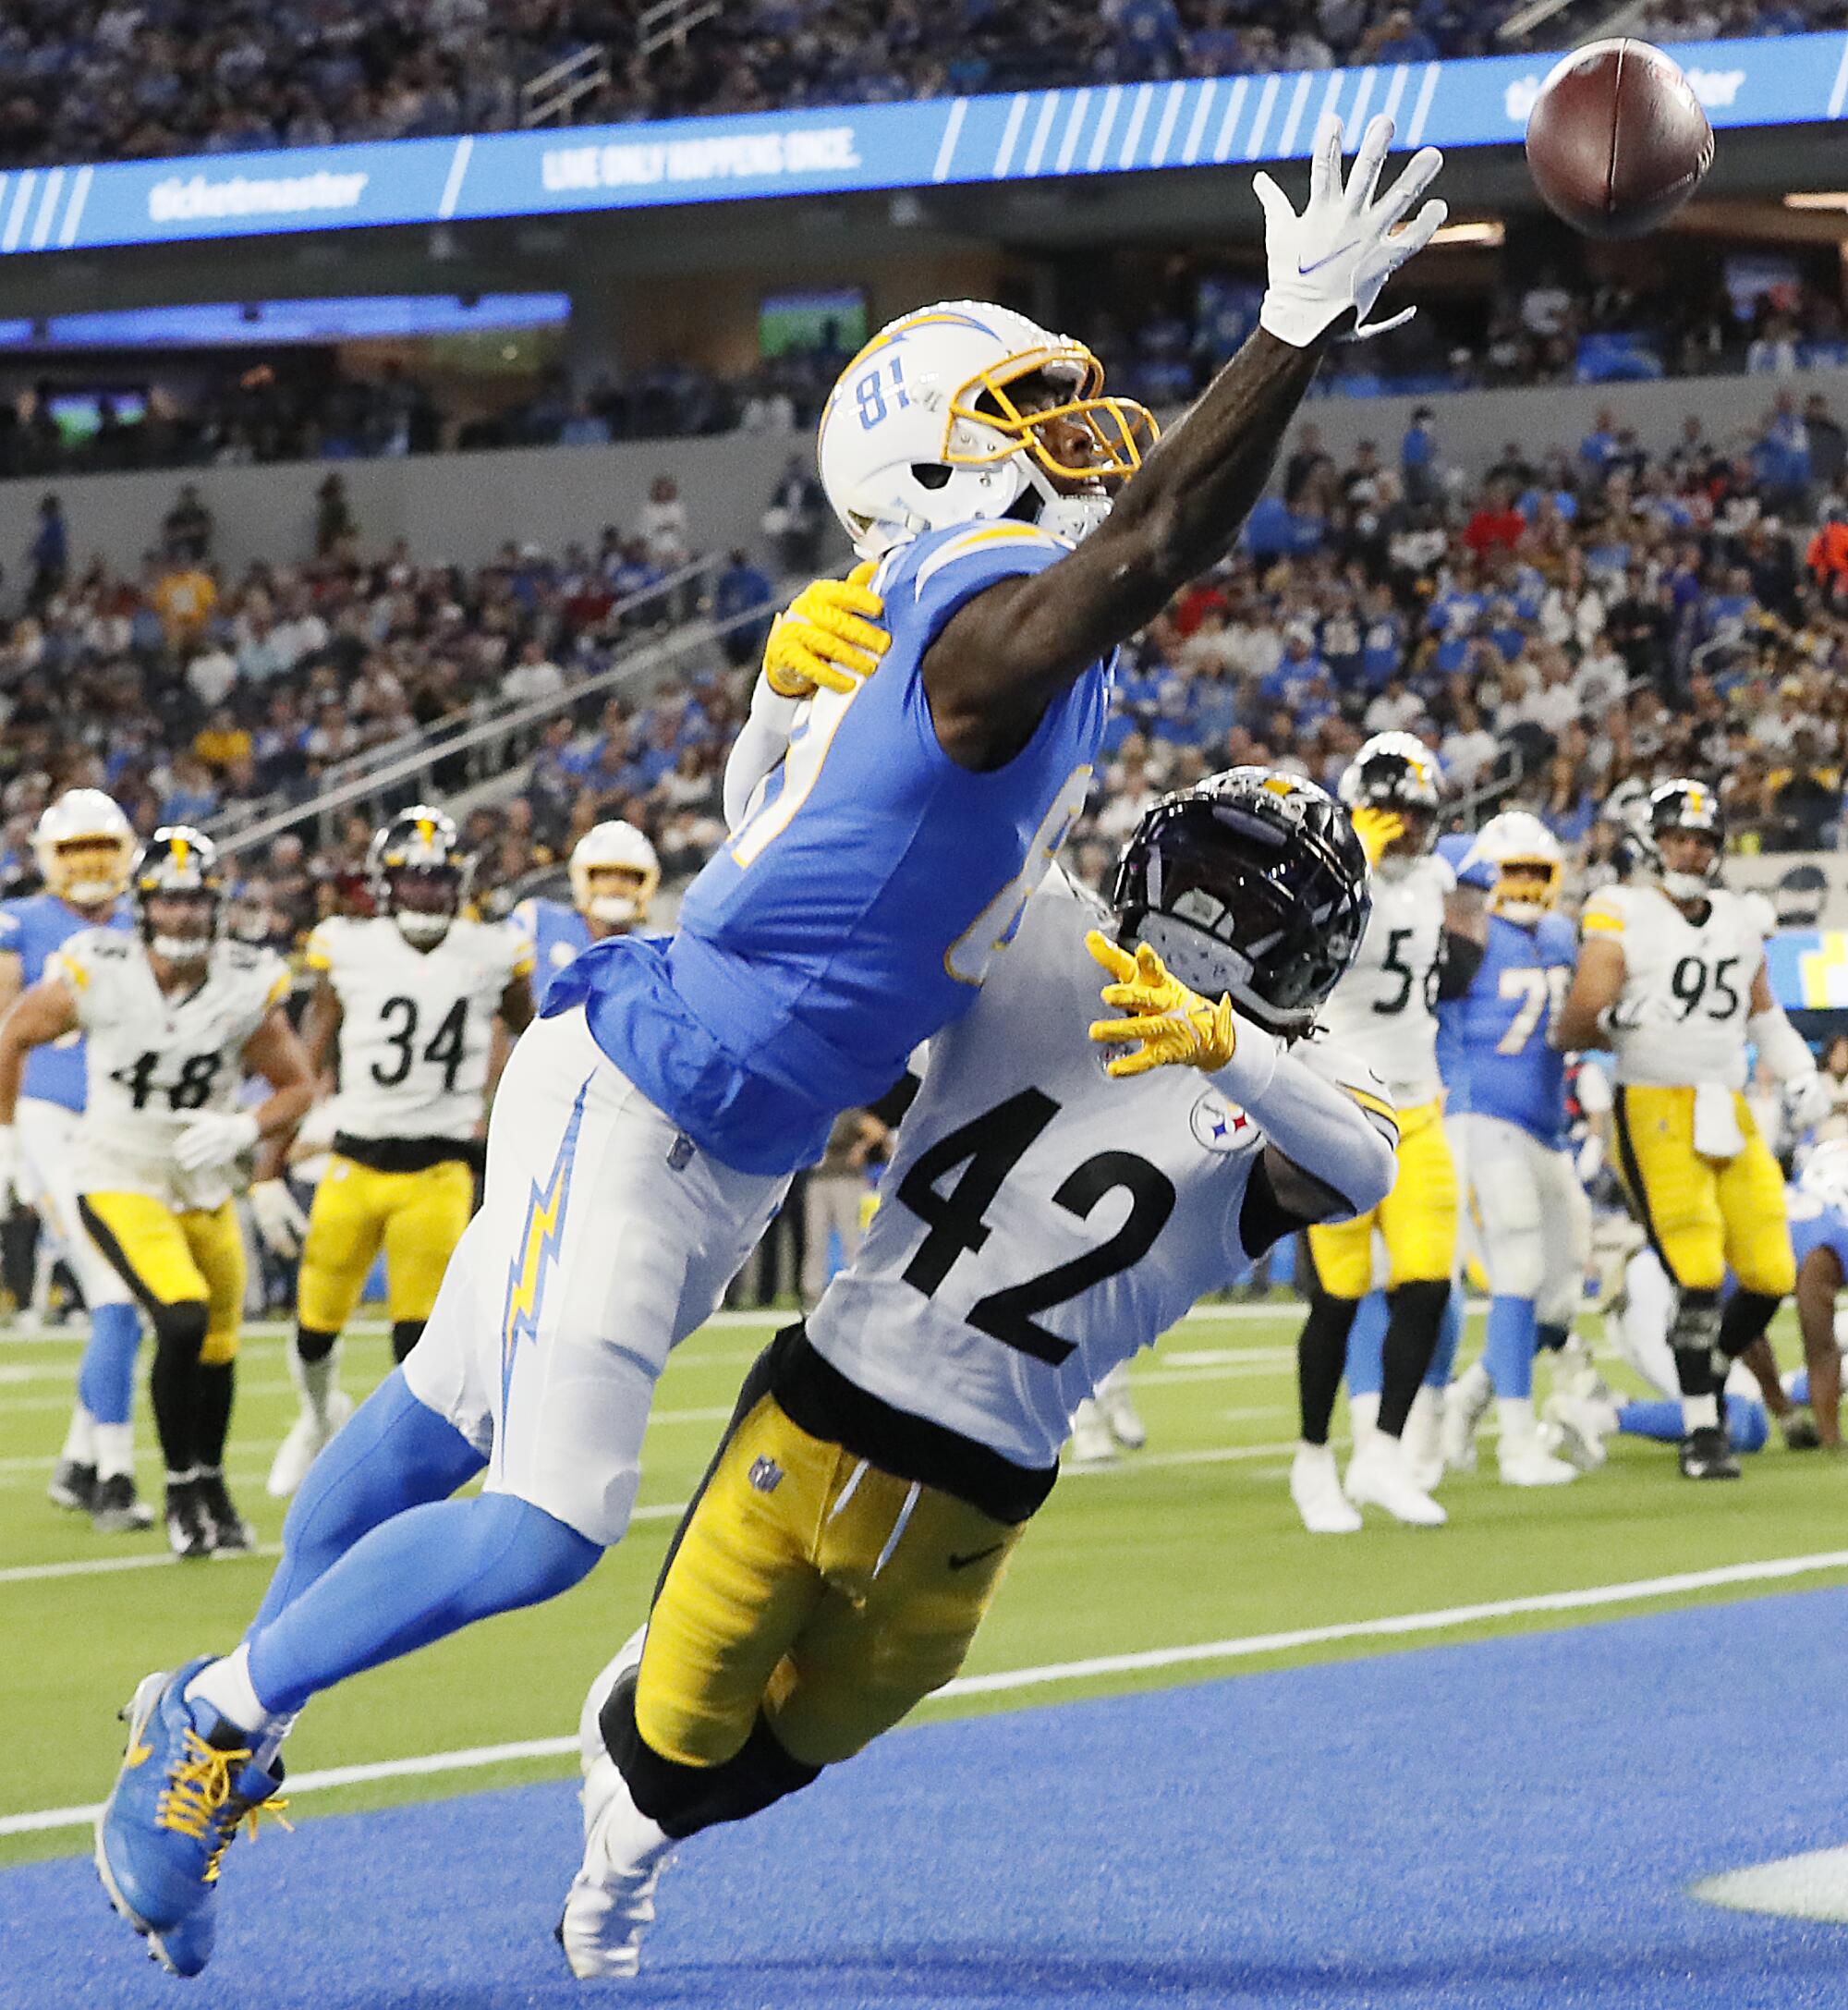 Chargers receiver Mike Williams can't haul in a touchdown pass while under pressure from Steelers cornerback James Pierre.